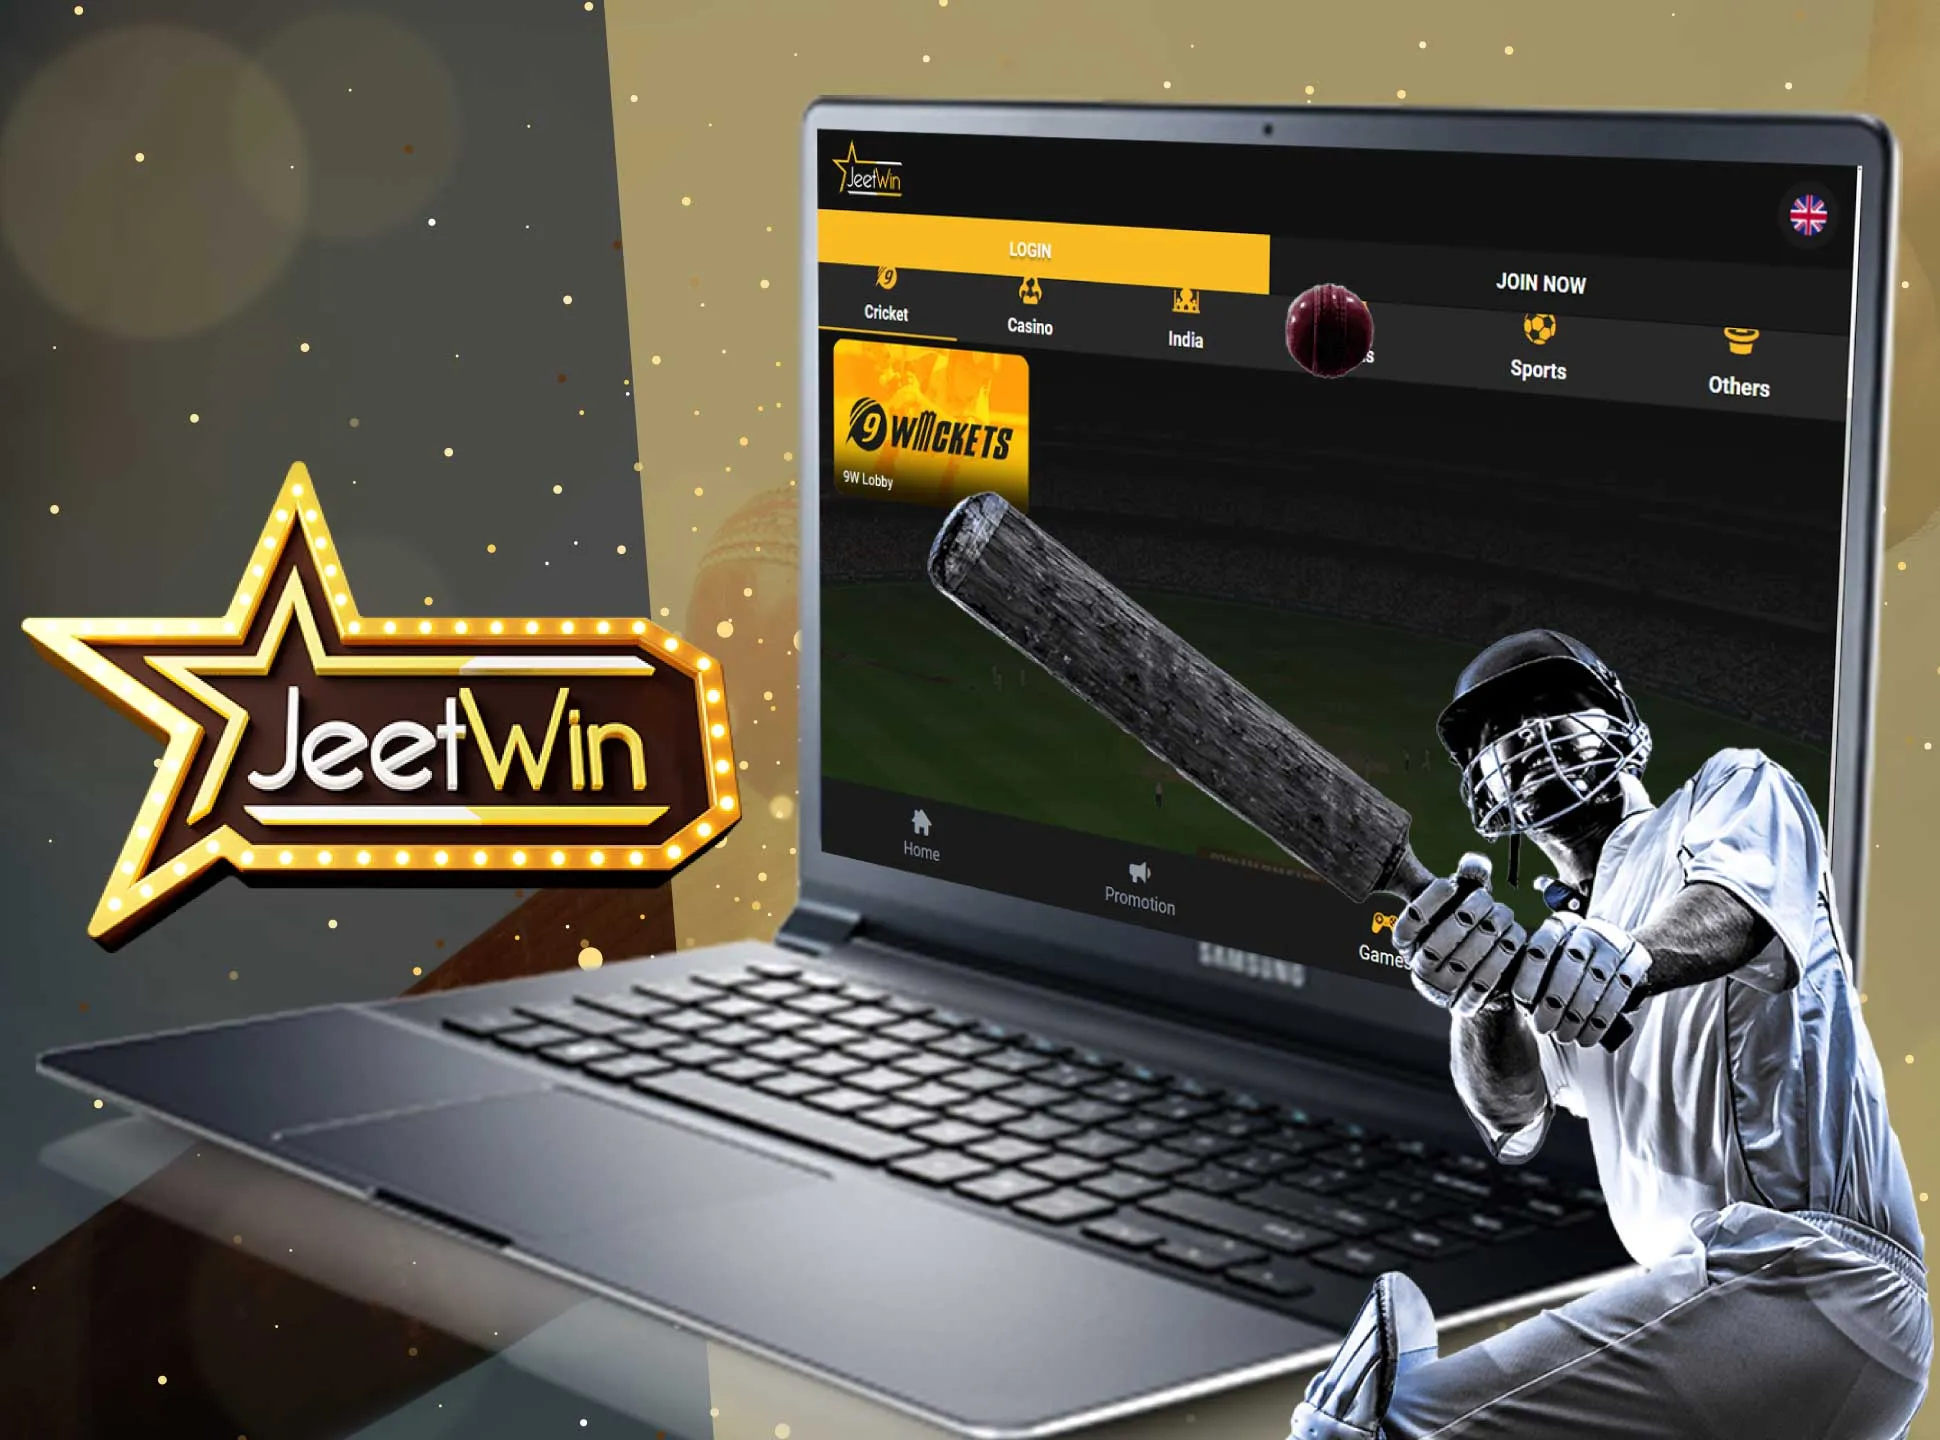 Find your favorite cricket team and place a bet on it on Jeetwin.